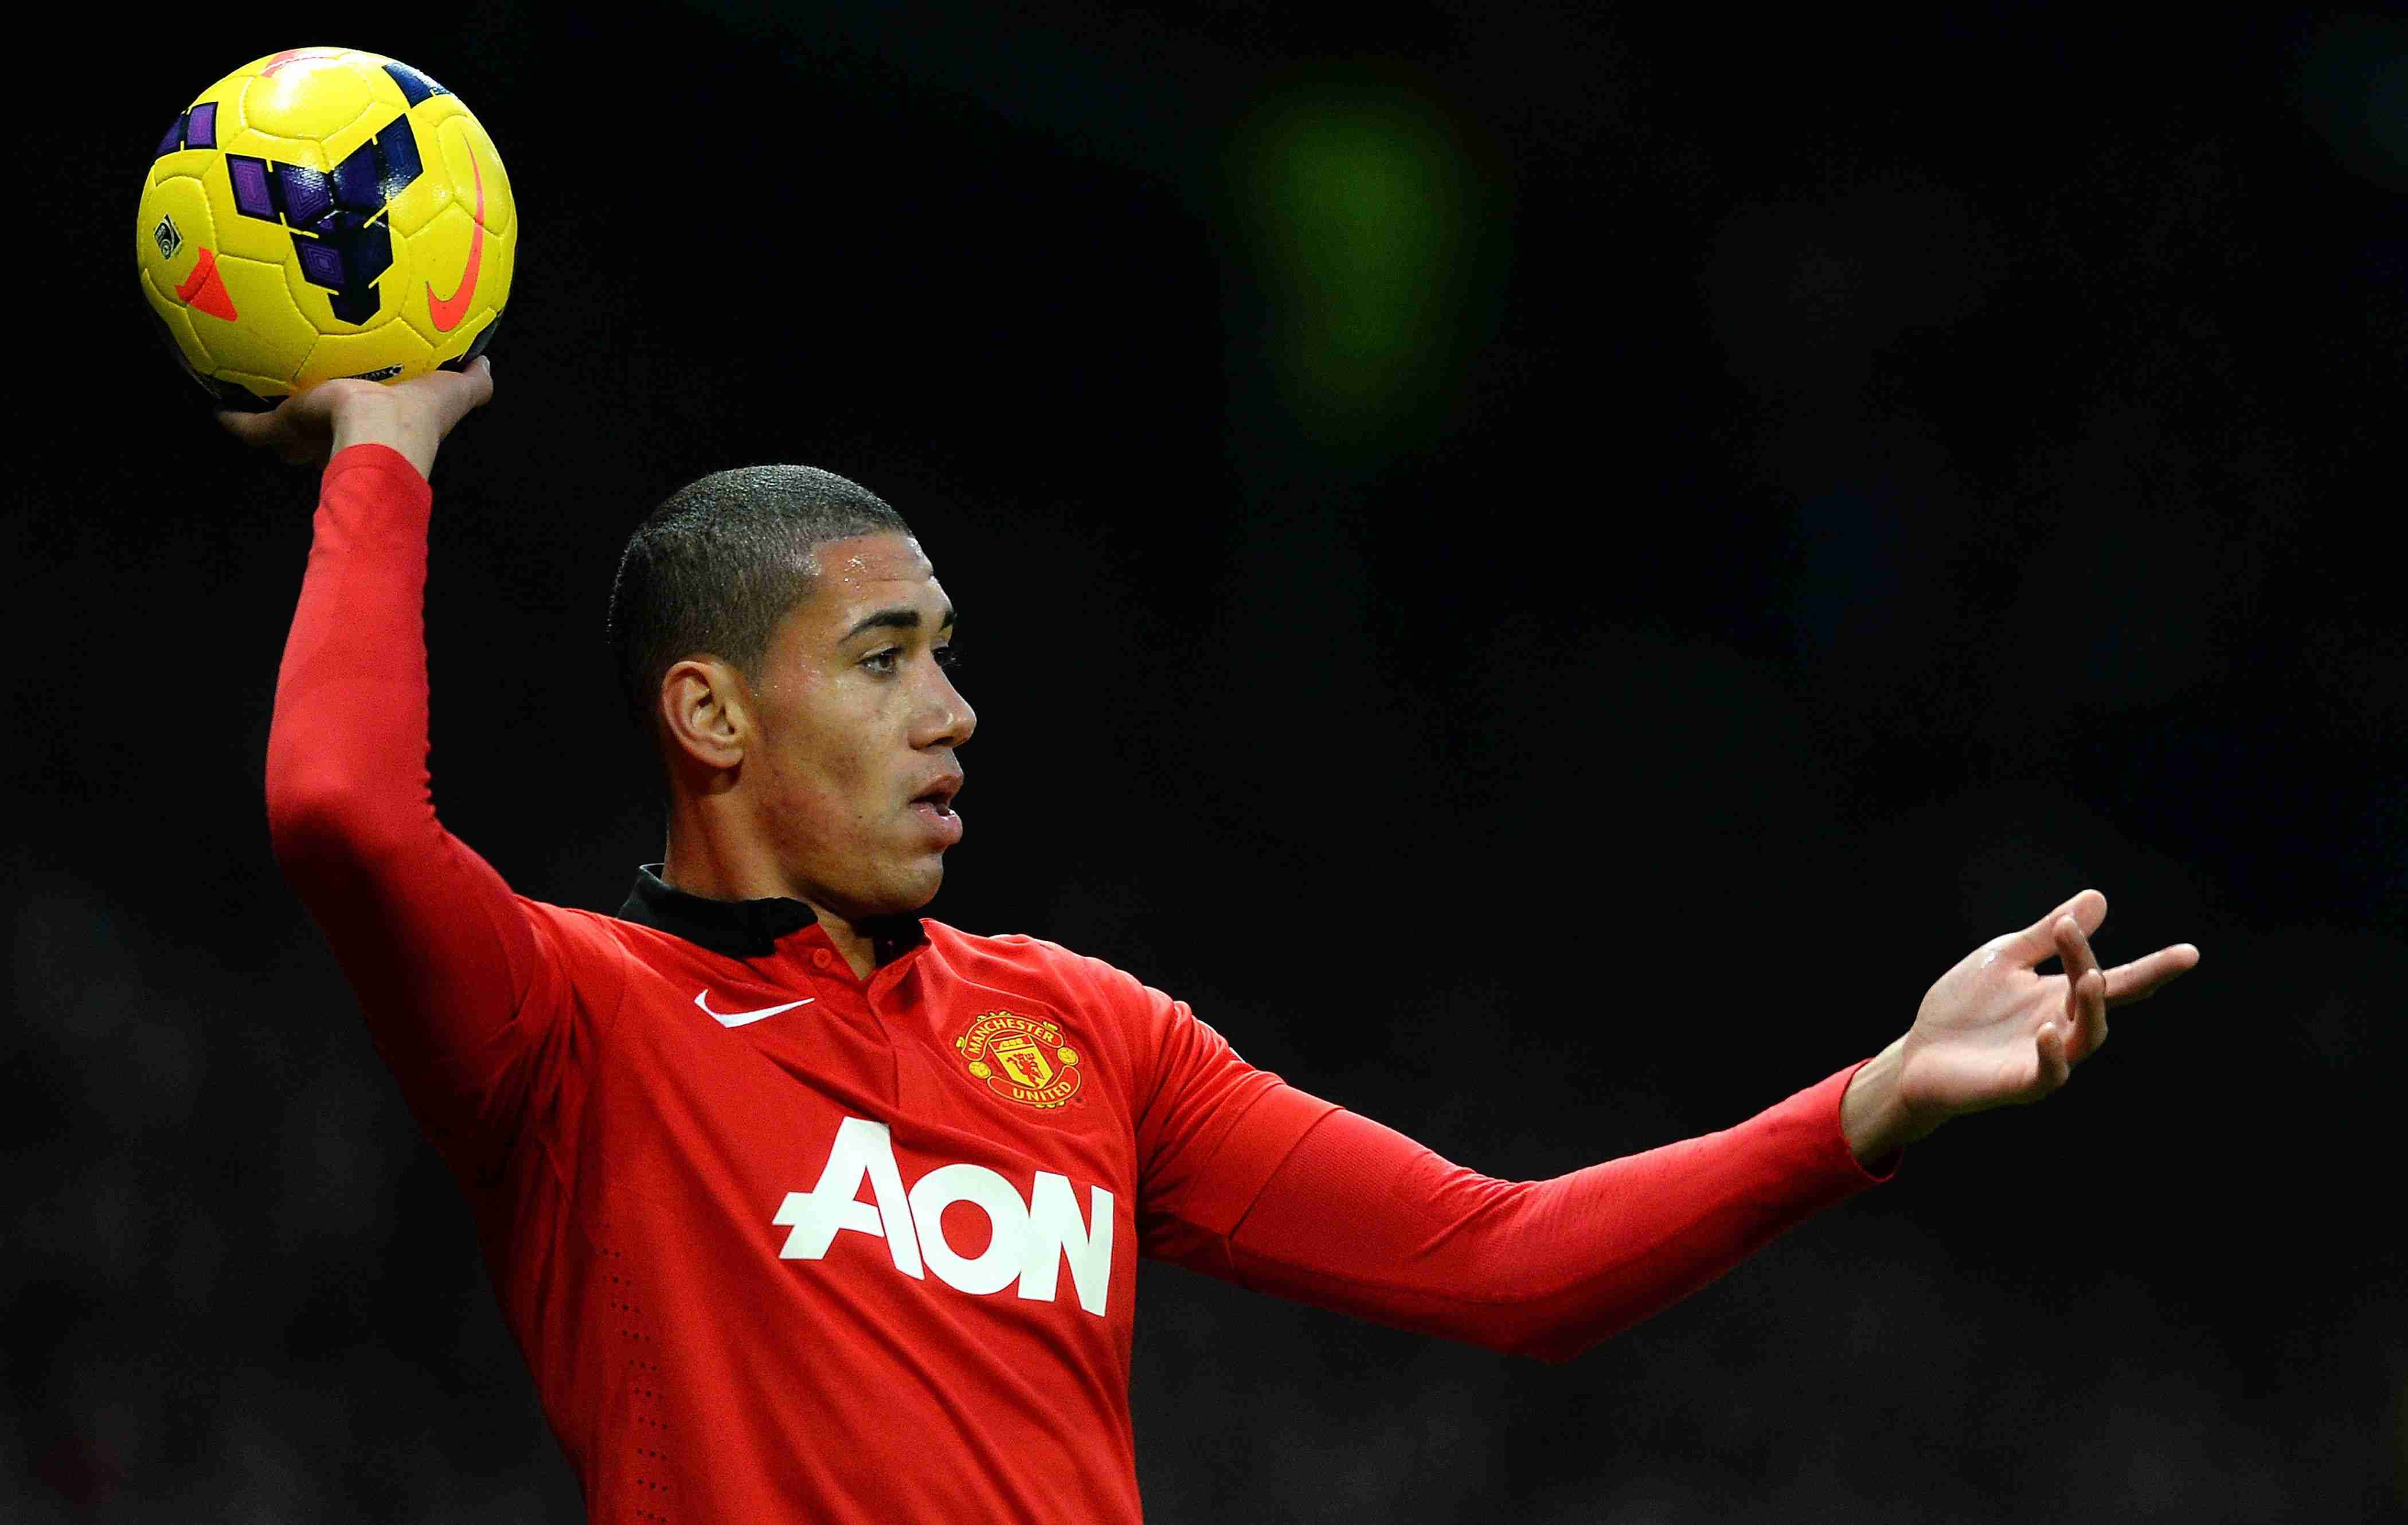 yellow and blue Nike soccer ball, chris smalling, football player